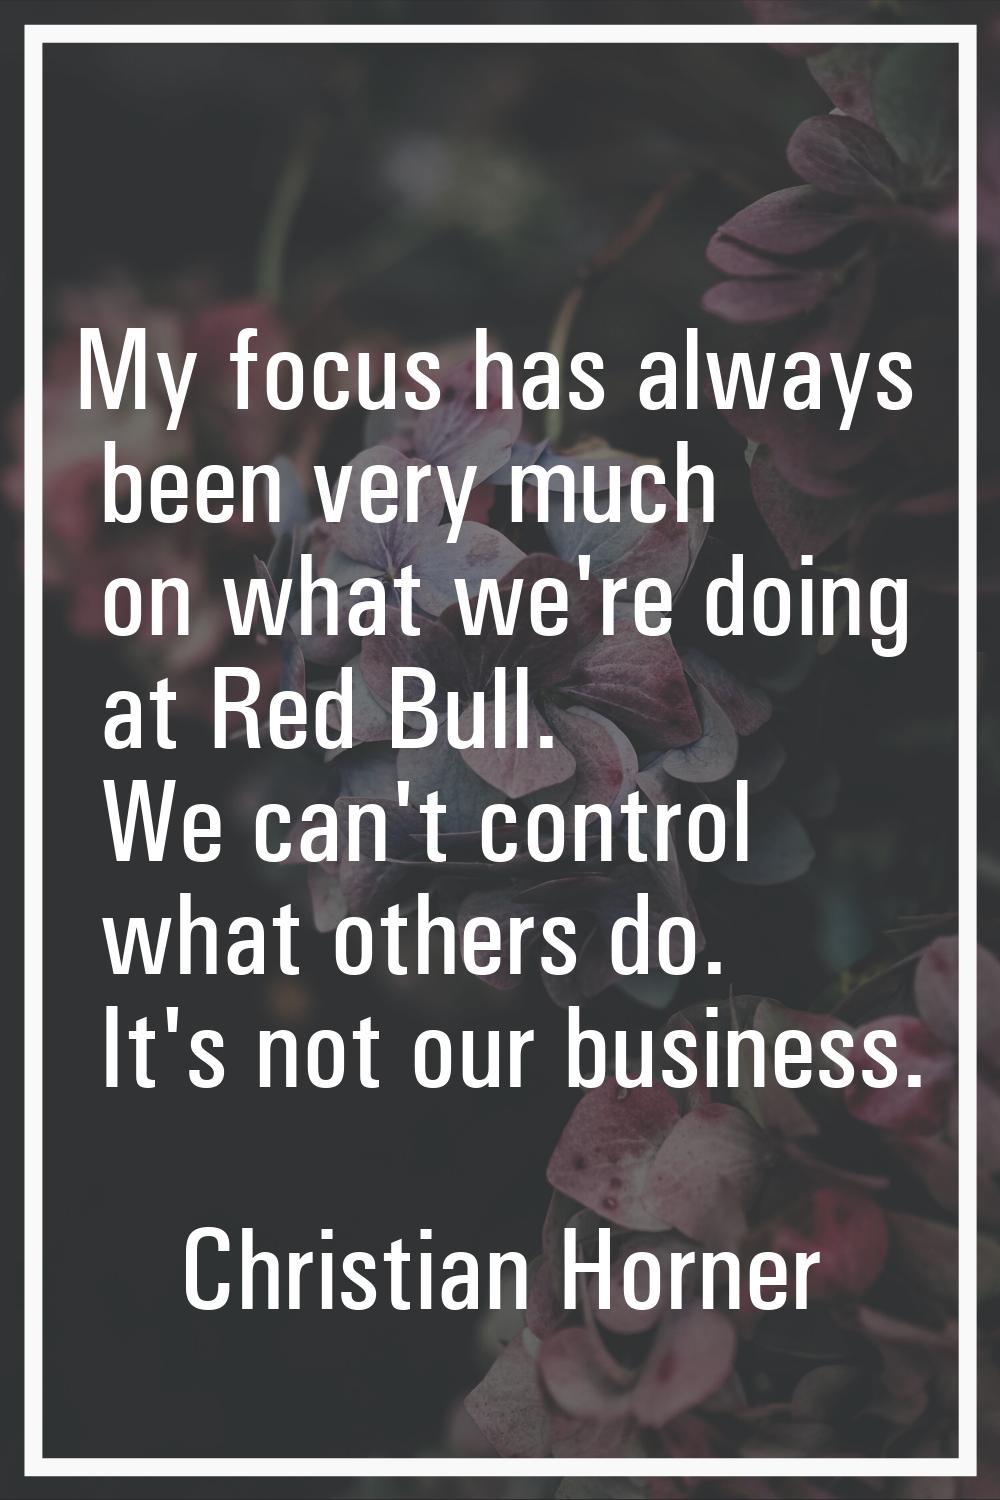 My focus has always been very much on what we're doing at Red Bull. We can't control what others do